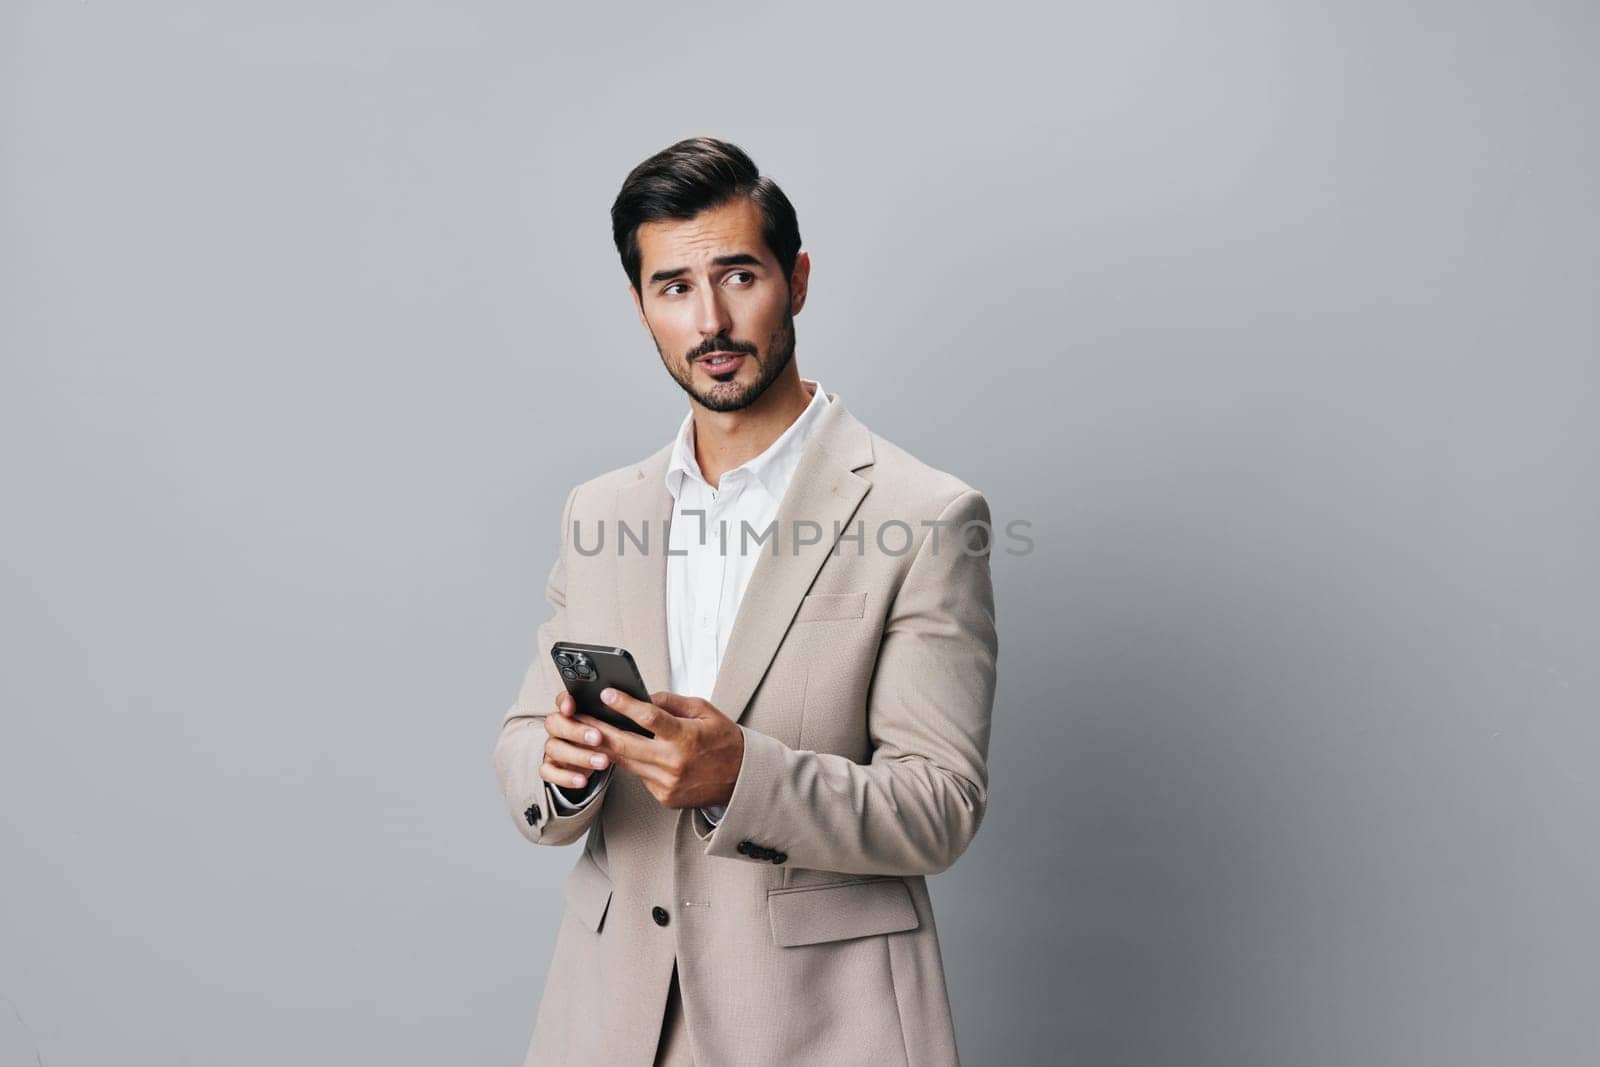 man hold portrait handsome app technology beard call confident connection communication business businessman selfies phone message smartphone happy cyberspace smile suit